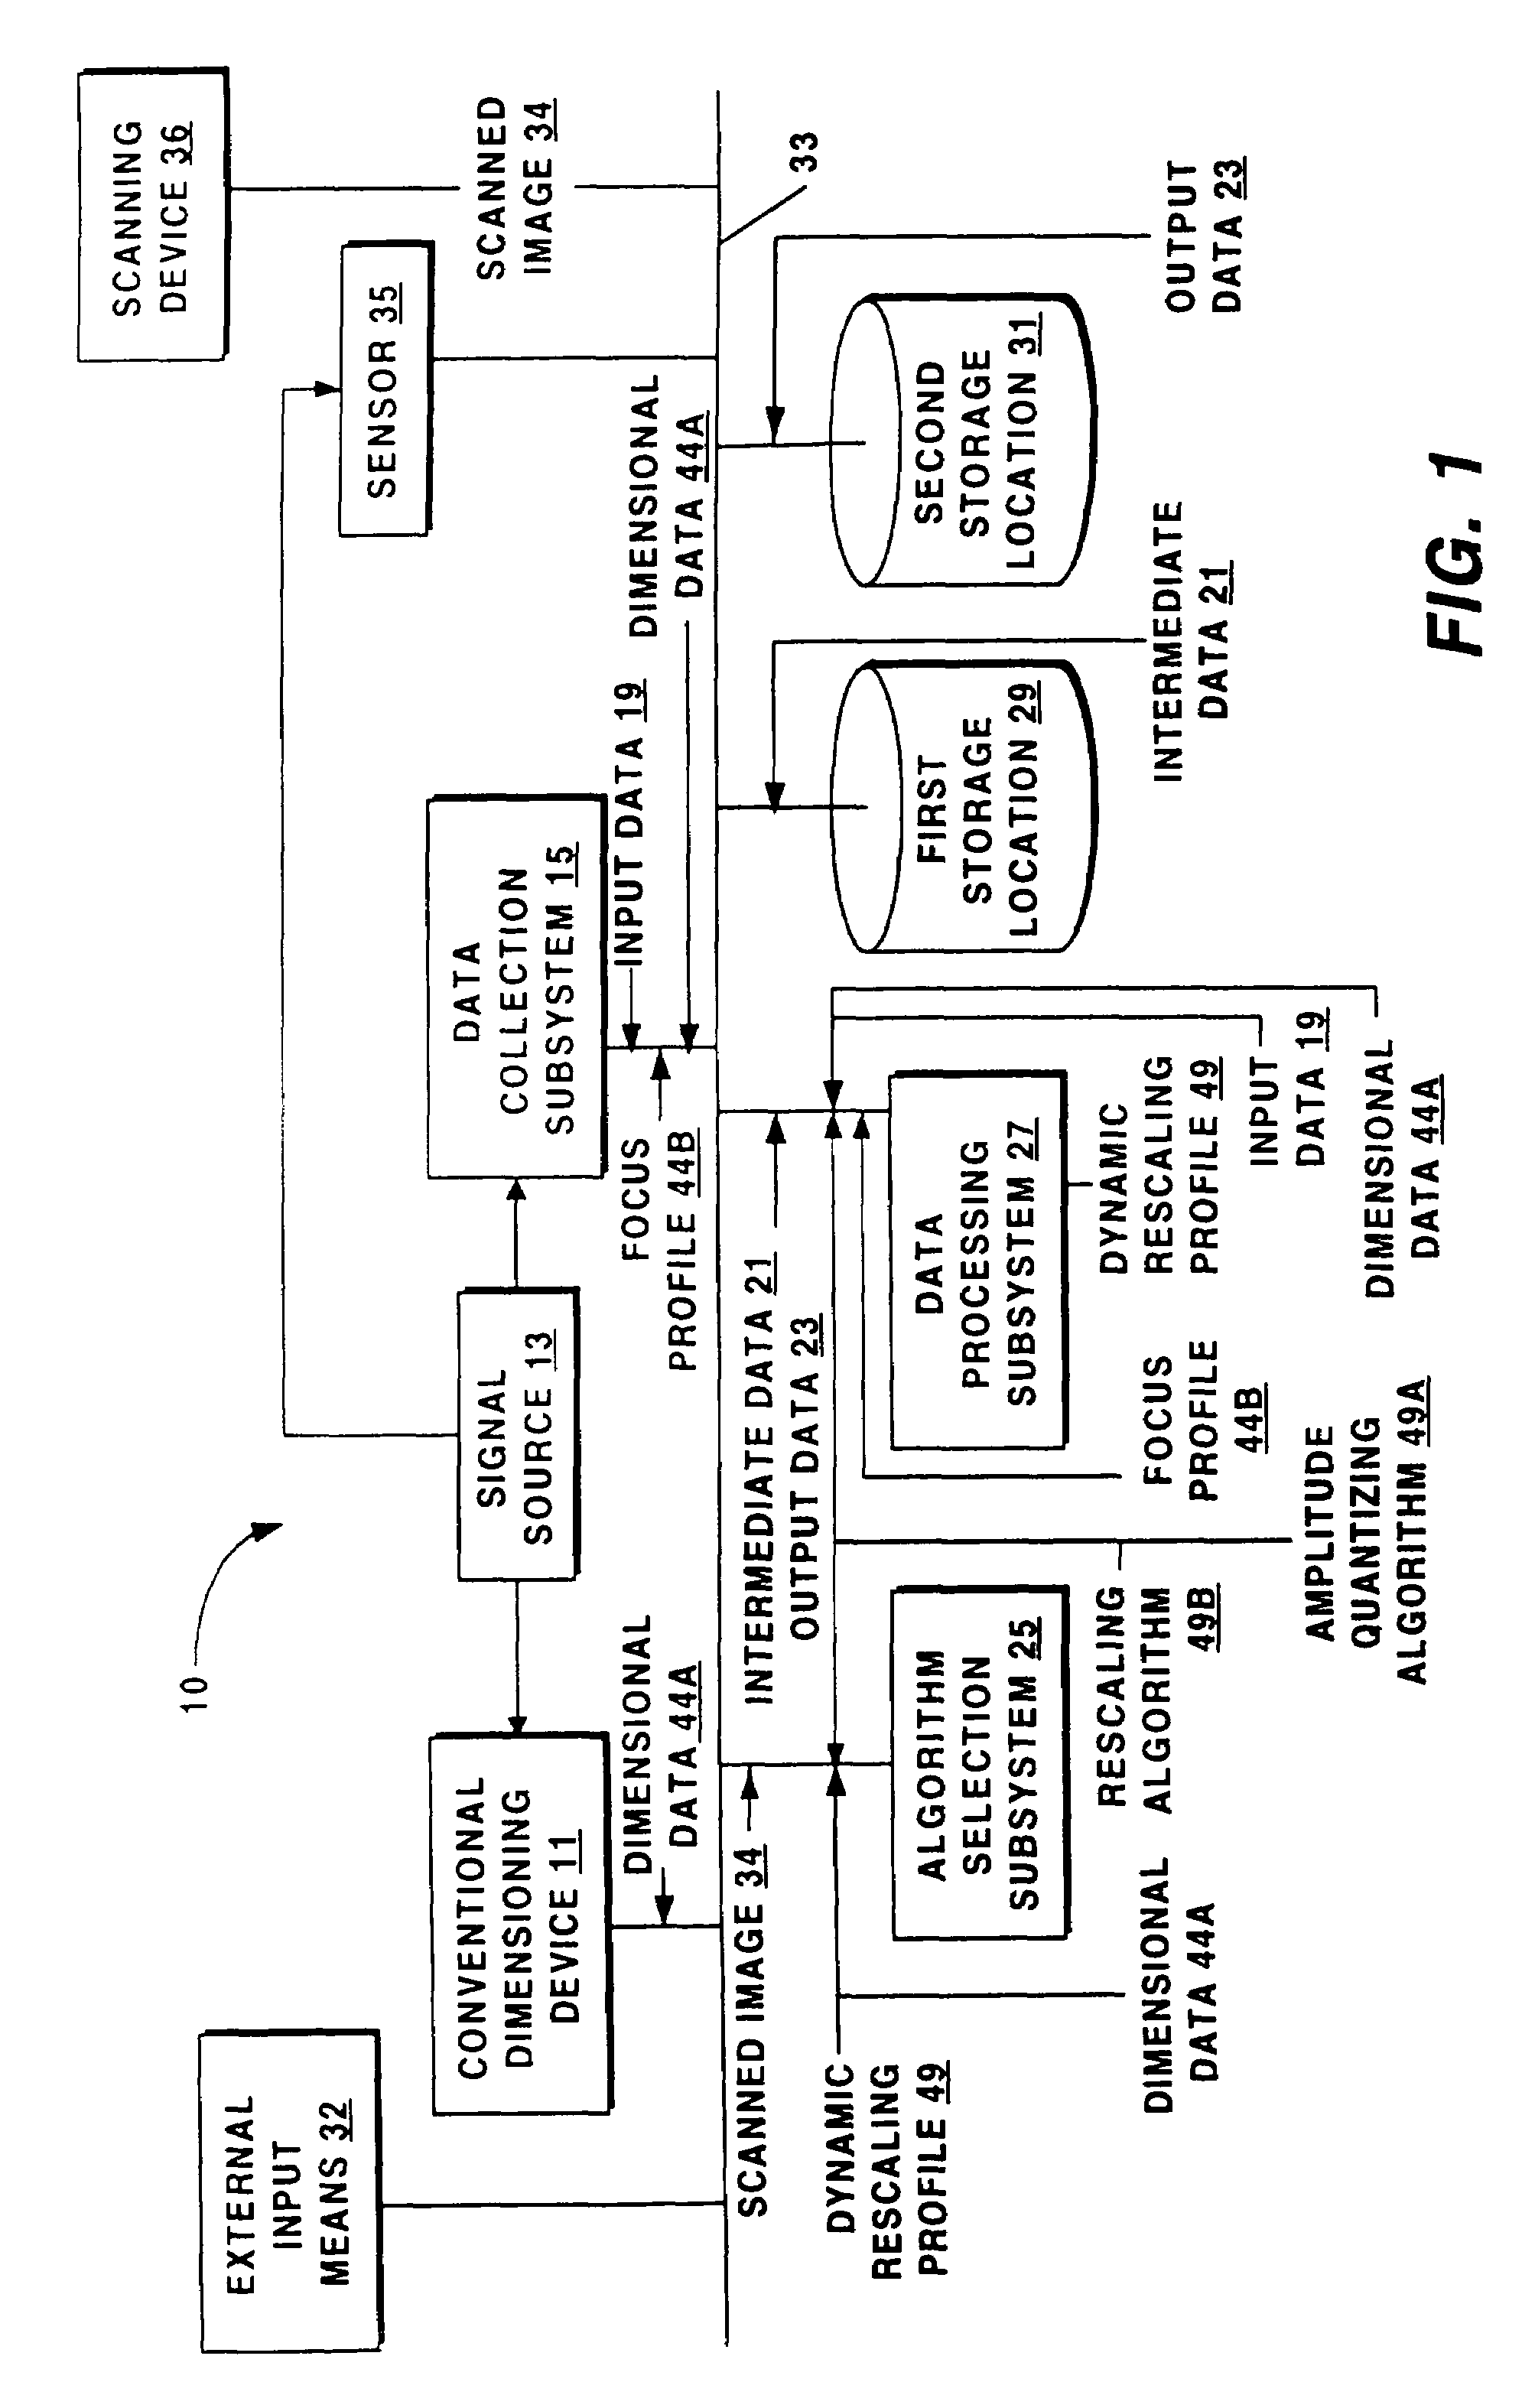 Constant magnification imaging method and system